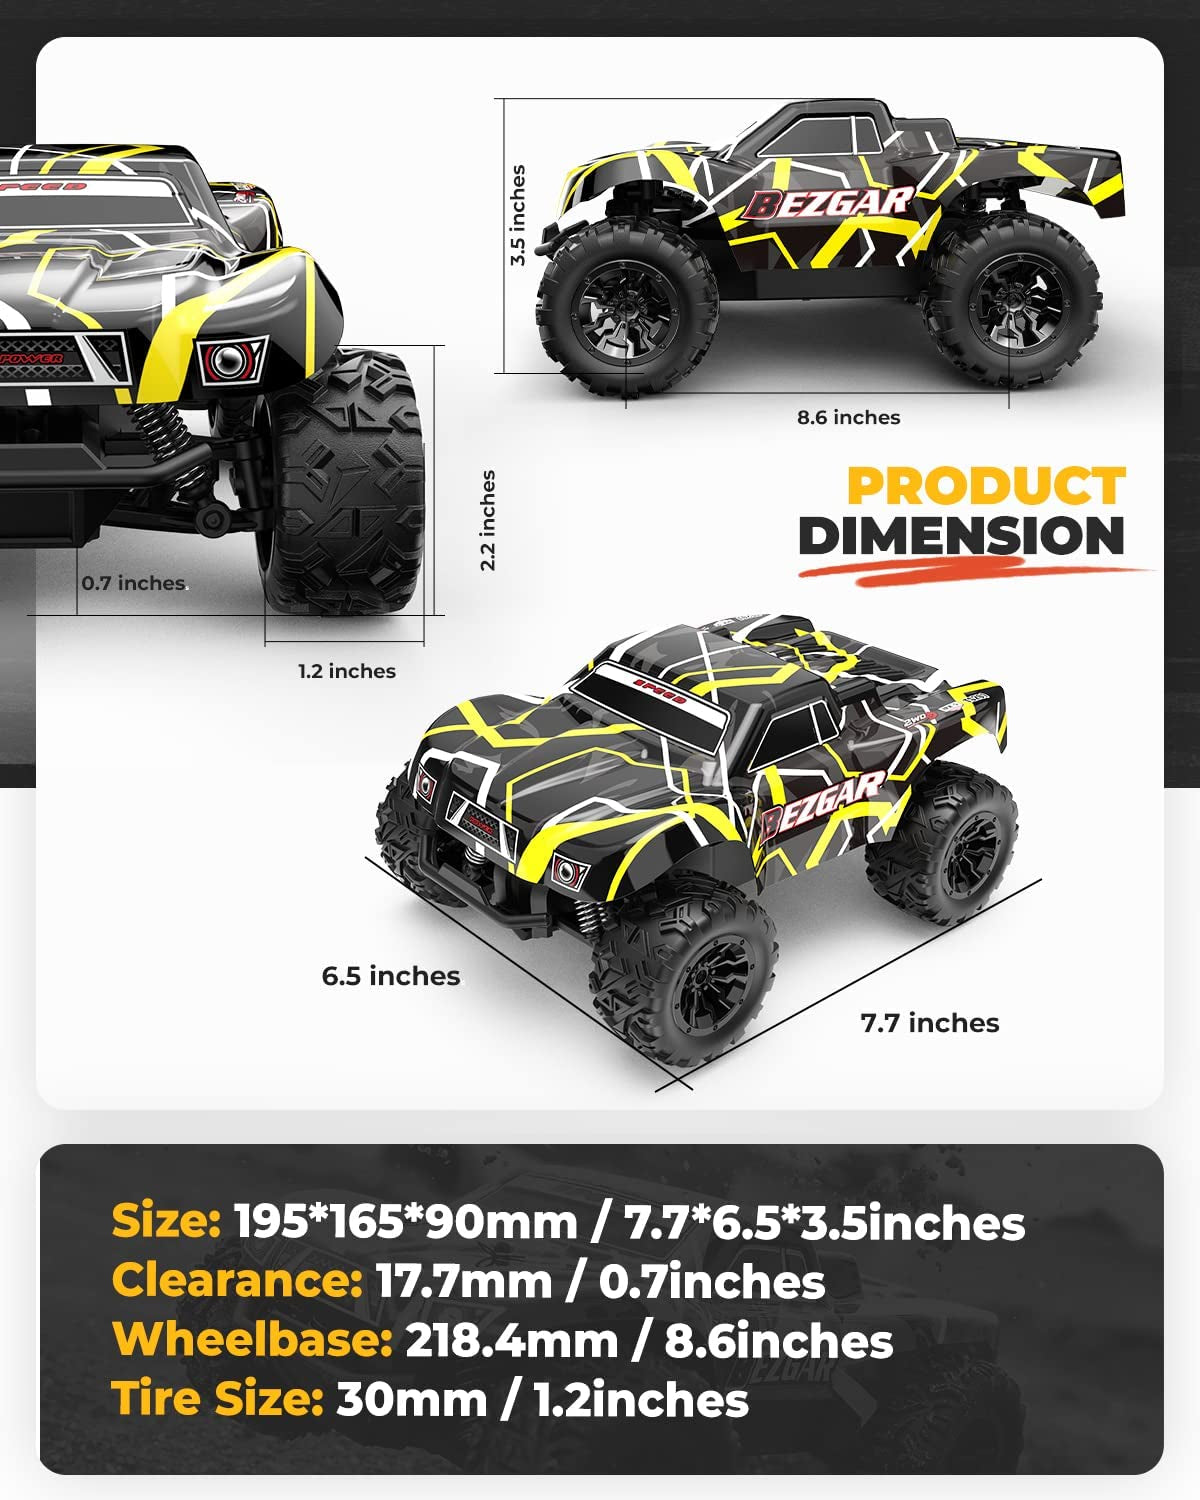 TS201 RC Cars-1:20 Remote Control Cars - 2WD,15 Km/H All Terrains Offroad Remote Control Truck - Rc Racing Car with 2 Rechargeable Batteries,Holiday Xmas Gift for Boys Kids,Adults